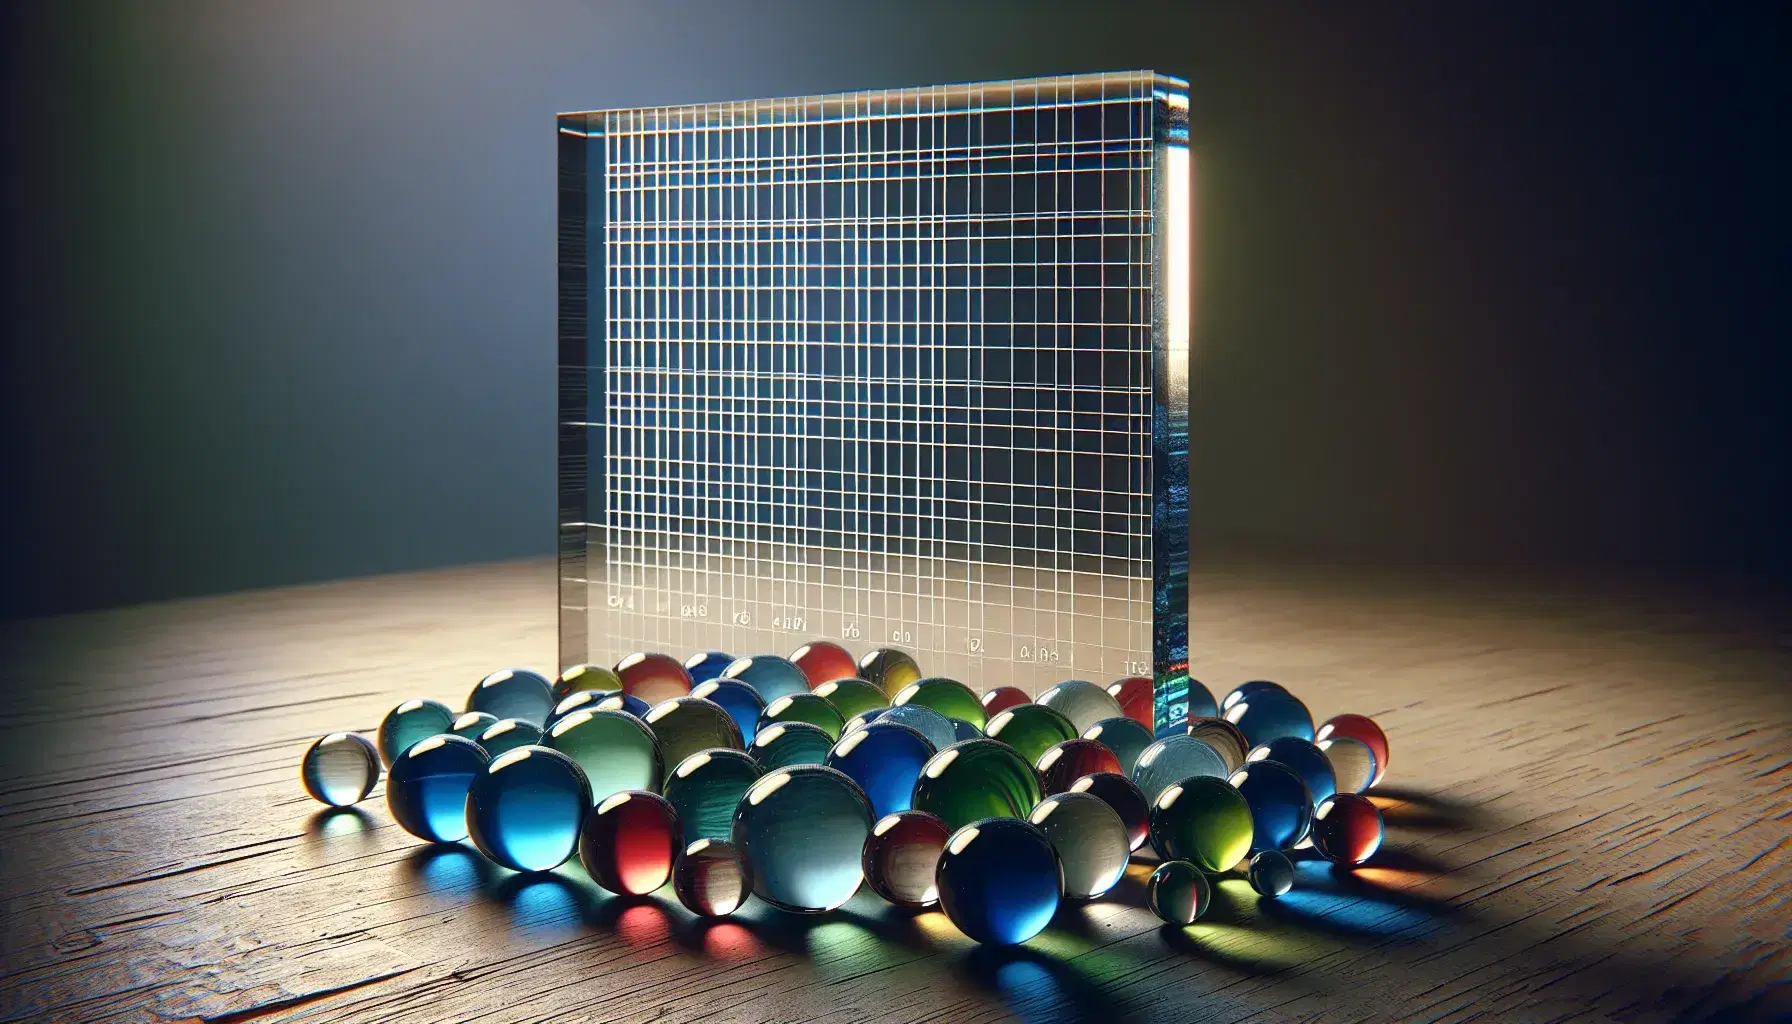 Transparent glass board with thin grid and colored marbles in shades of blue, green, red and yellow scattered on wooden surface.